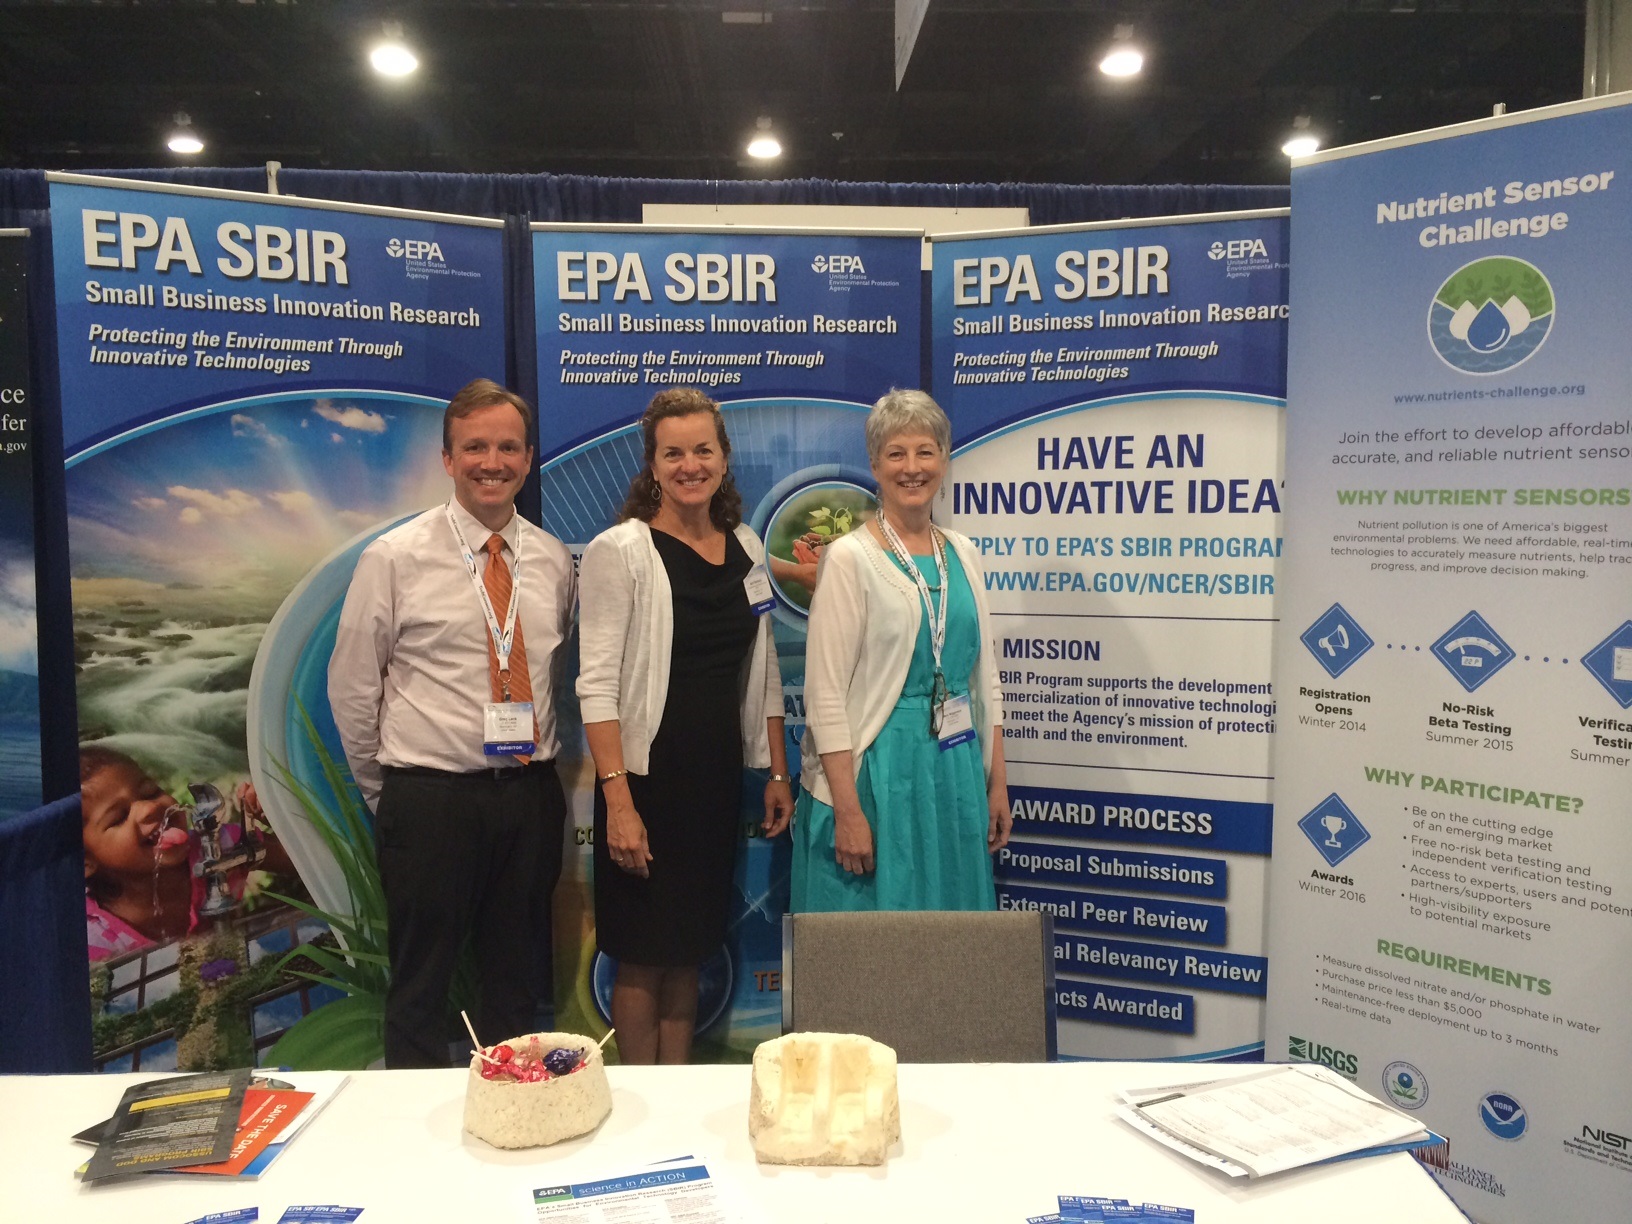 EPA's Small Business Innovation Research team at the conference.